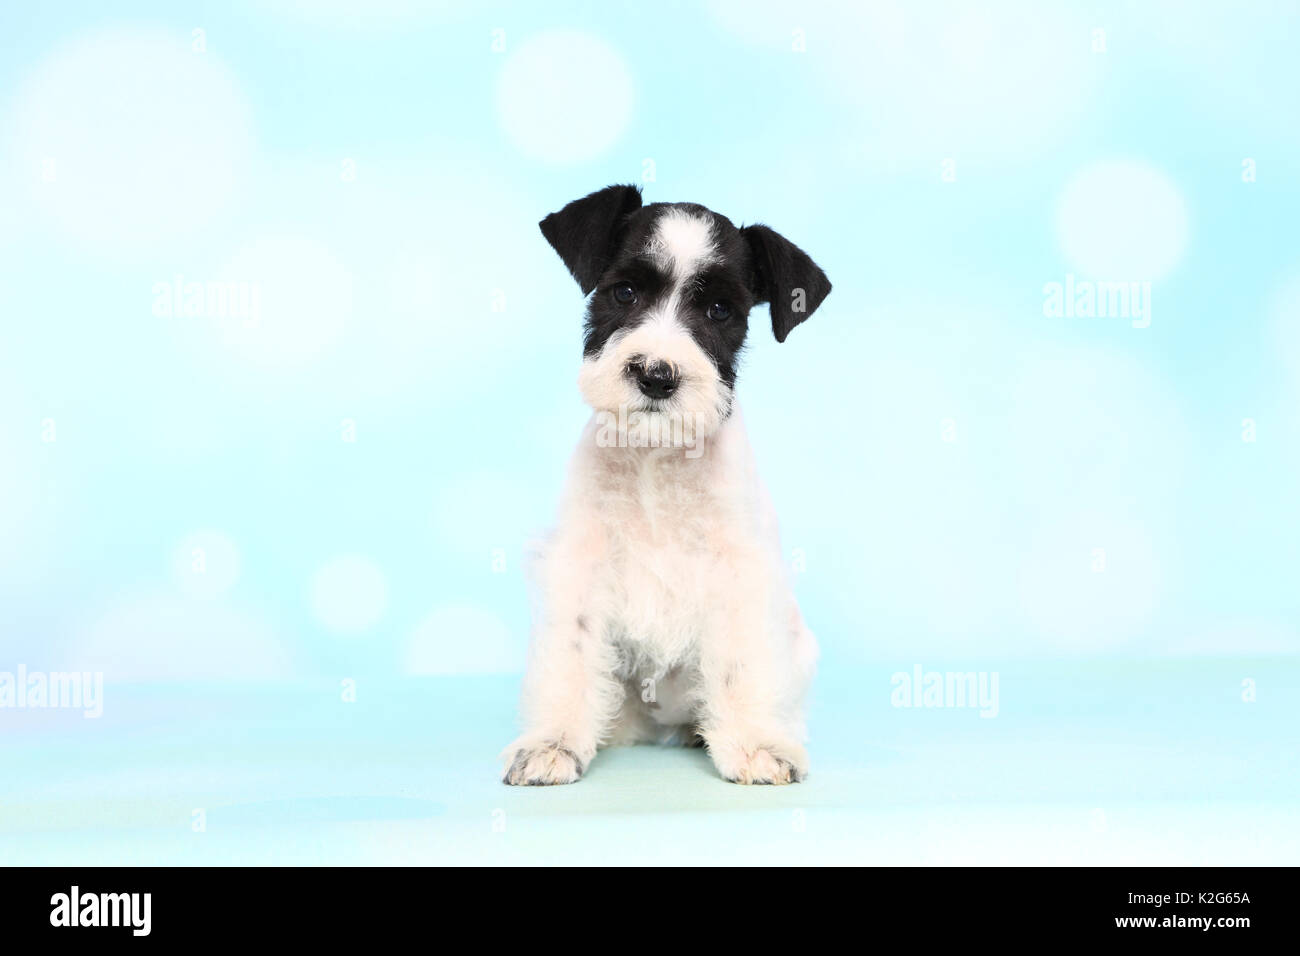 Parti-colored Miniature Schnauzer. Puppy sitting, seen against a light blue background. Germany Stock Photo